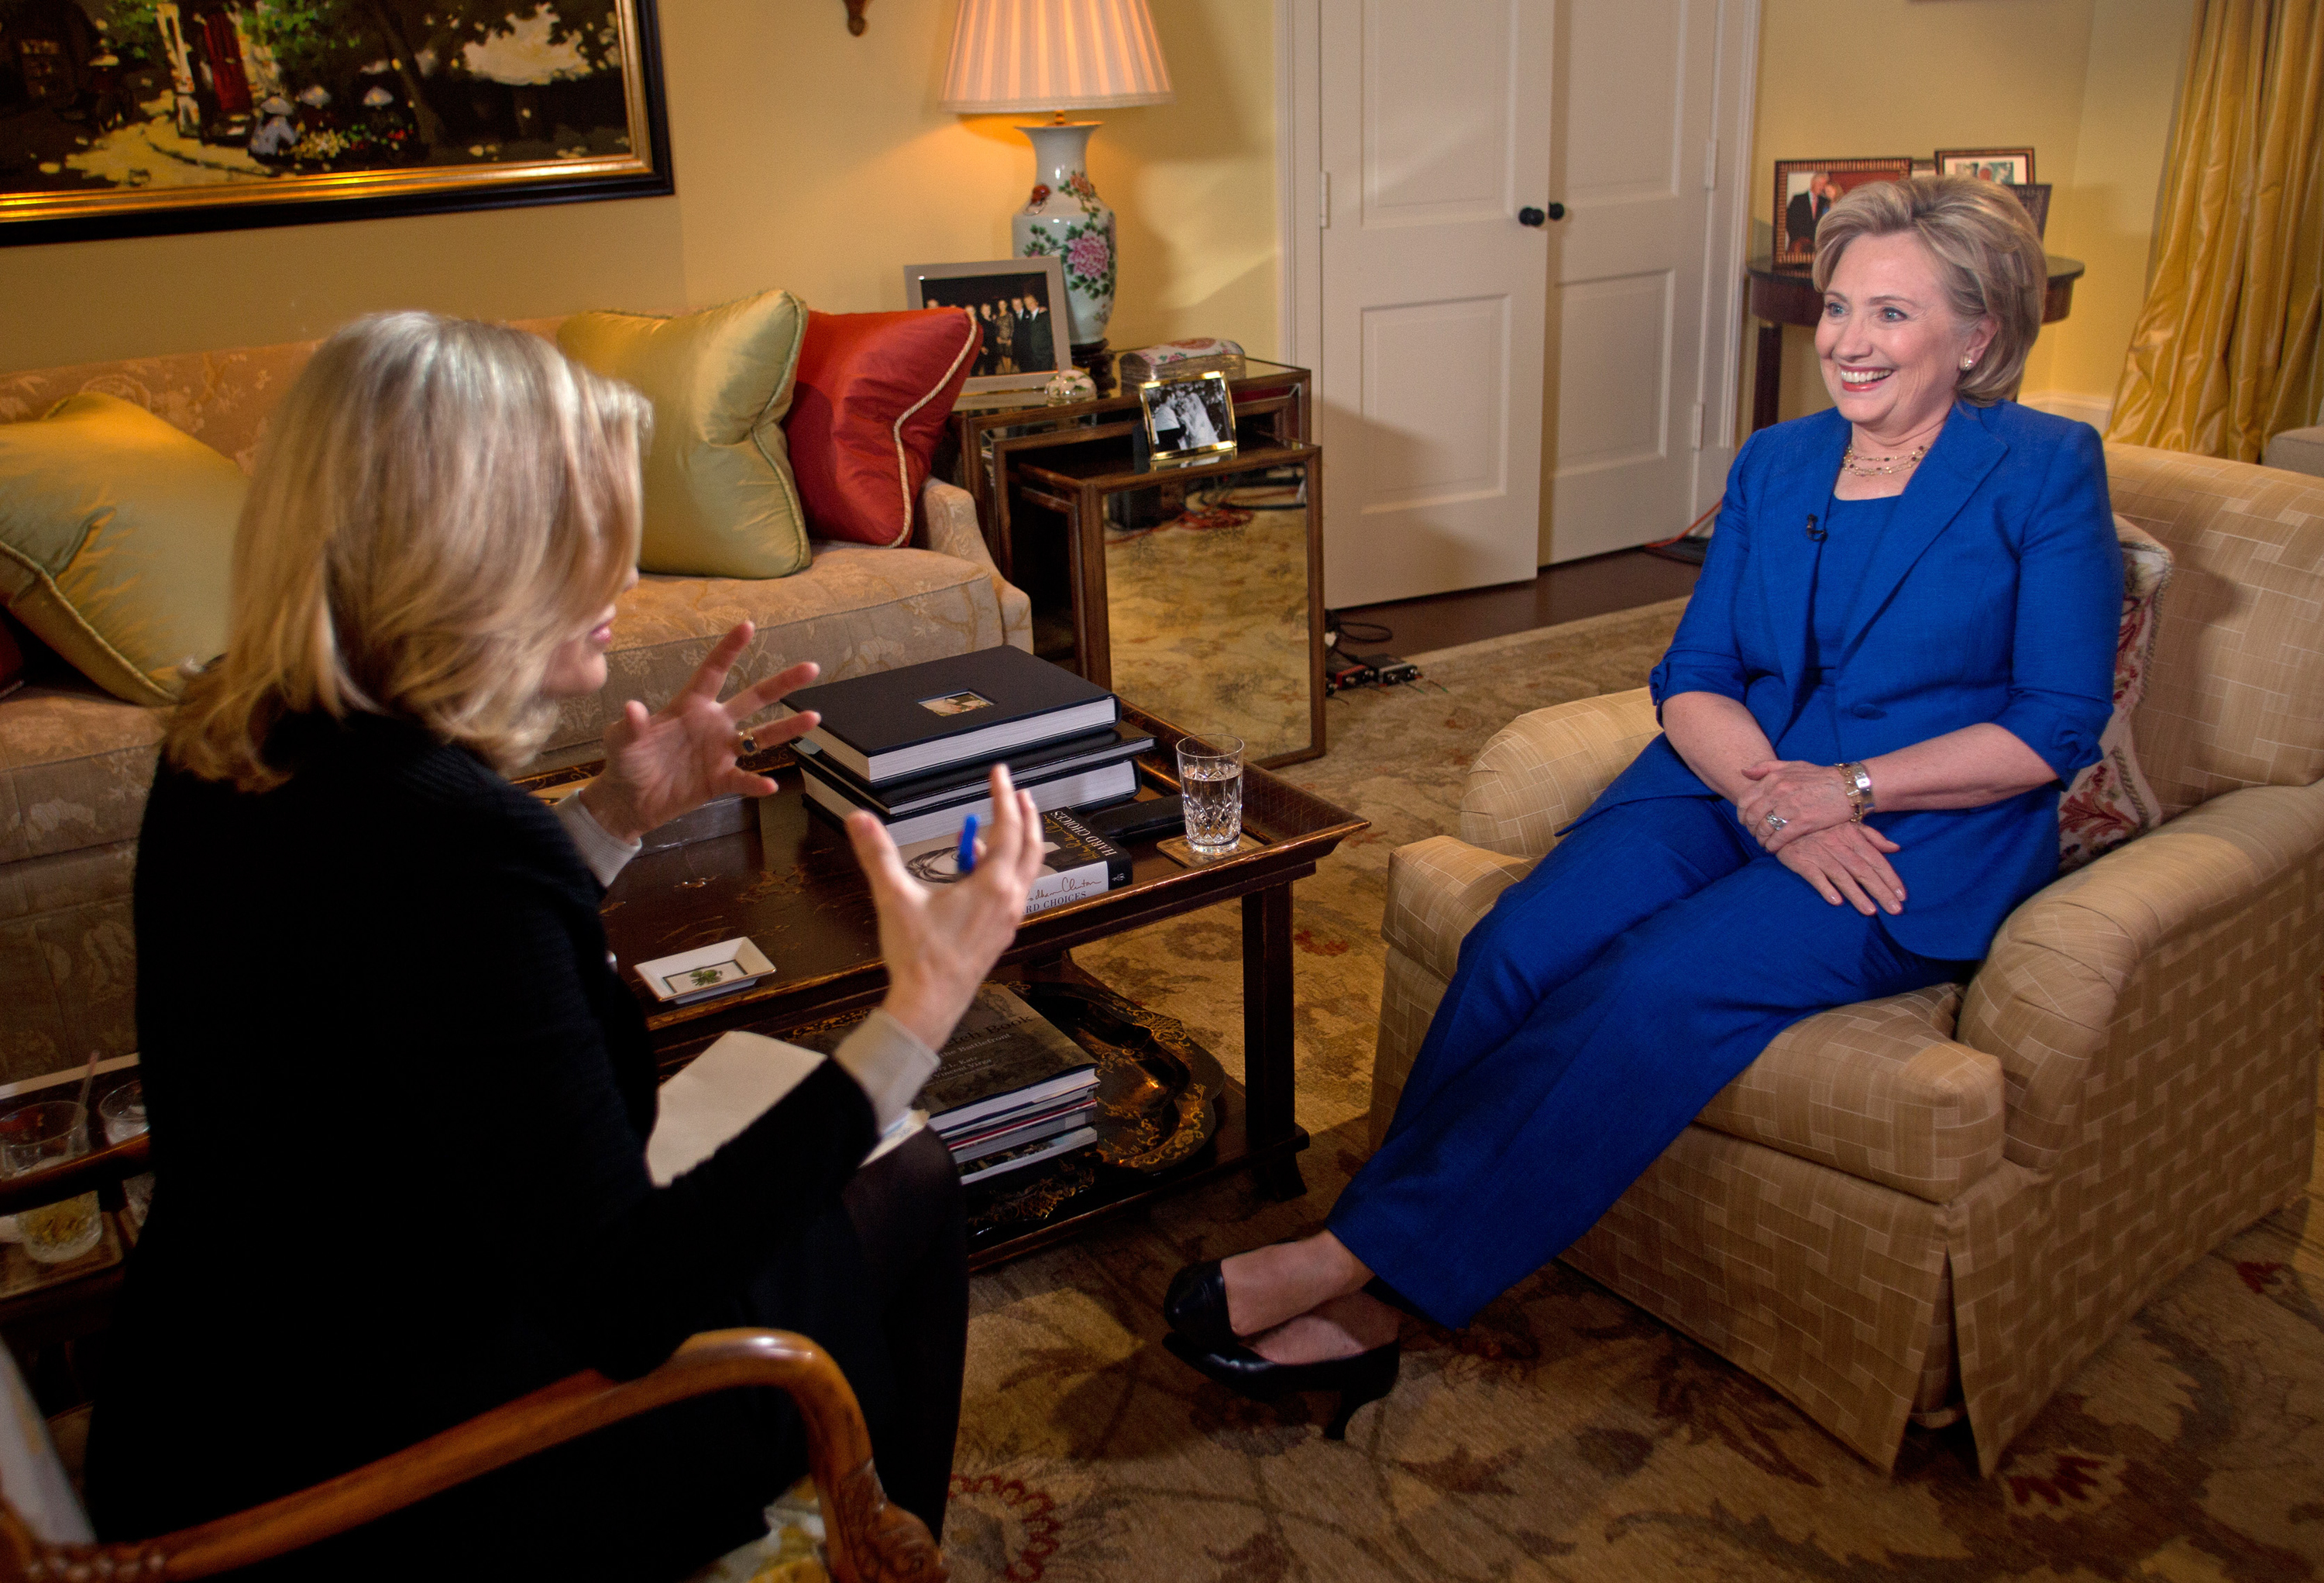 Hillary Clinton talks with ABC News anchor Diane Sawyer for her first television interview in conjunction with the release of her new book on Monday, June 9. (Martin H. Simon—ABC / Getty Images)